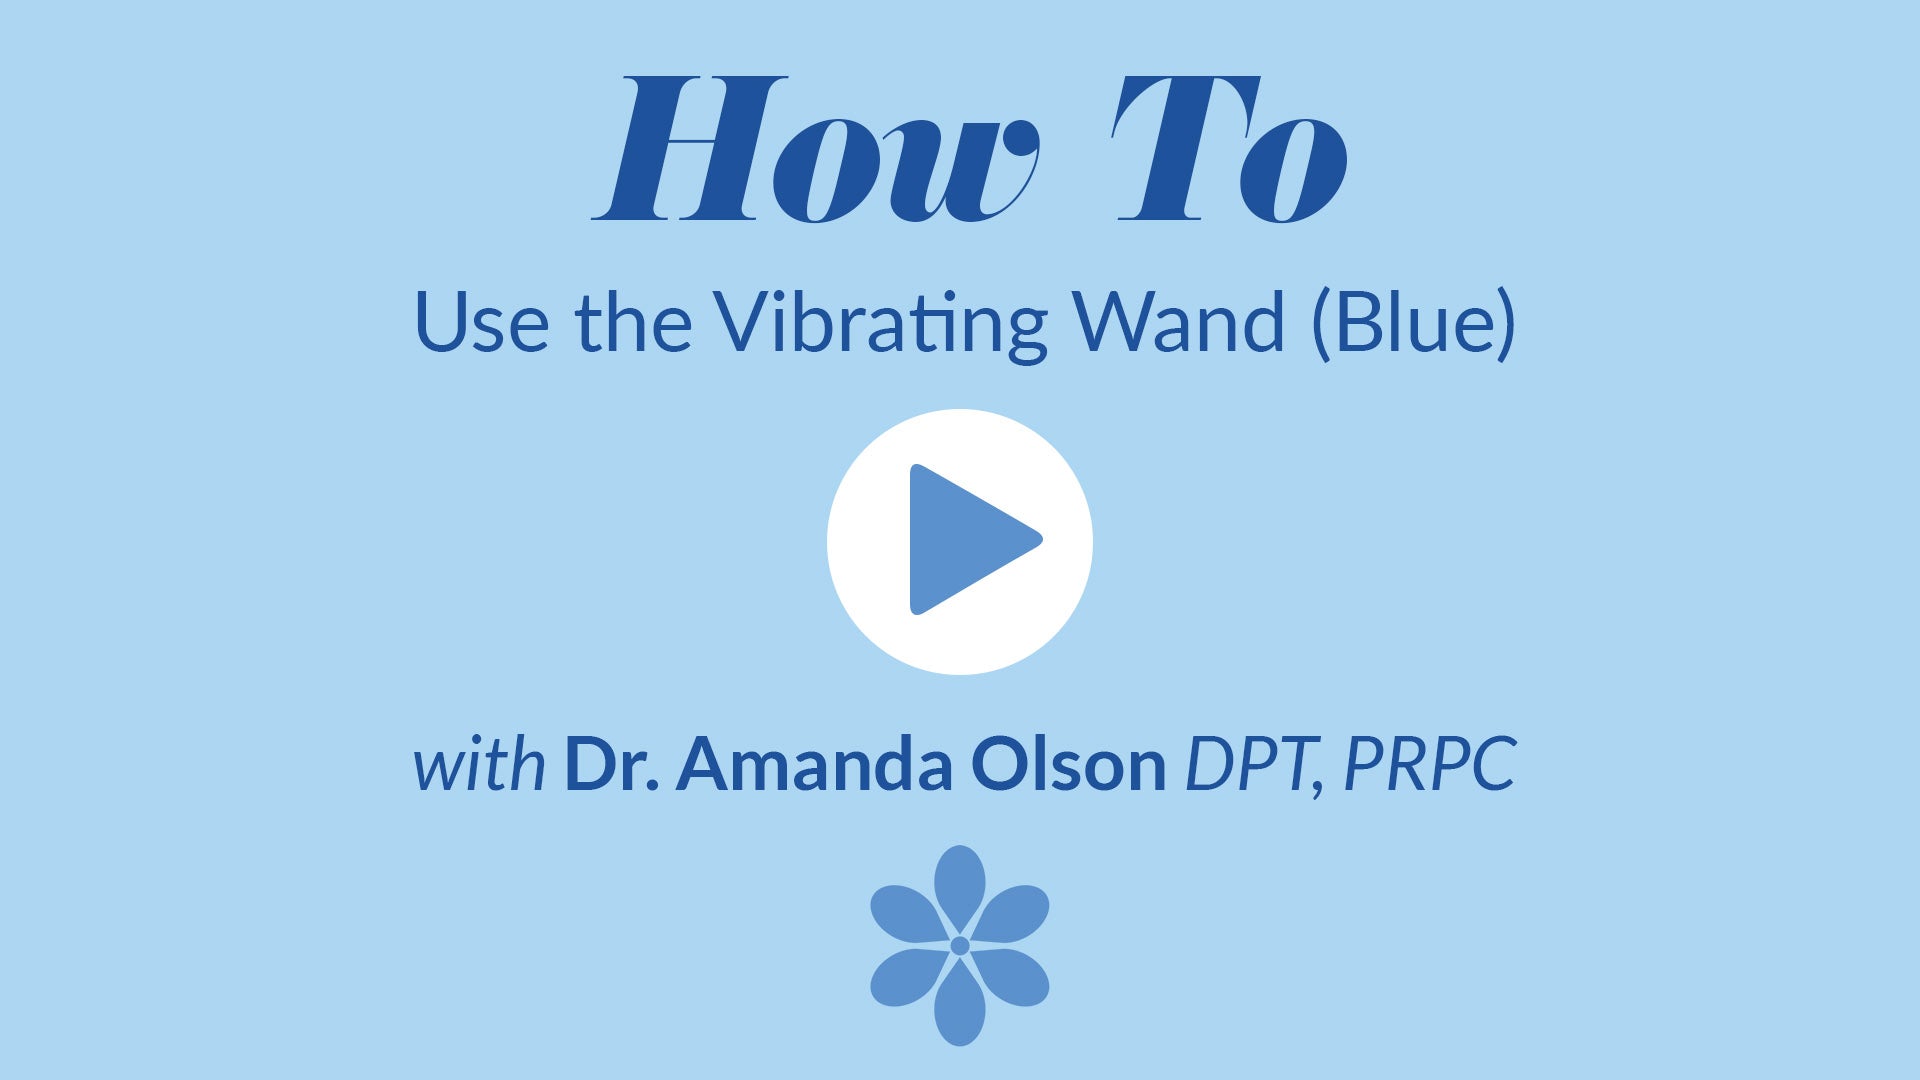 Load video: &lt;p&gt;Dr. Amanda has assembled some really helpful videos for everyone from beginners, to seasoned pro’s. Your support after purchase includes access to our extensive video archives, featuring videos like these.&lt;/p&gt;